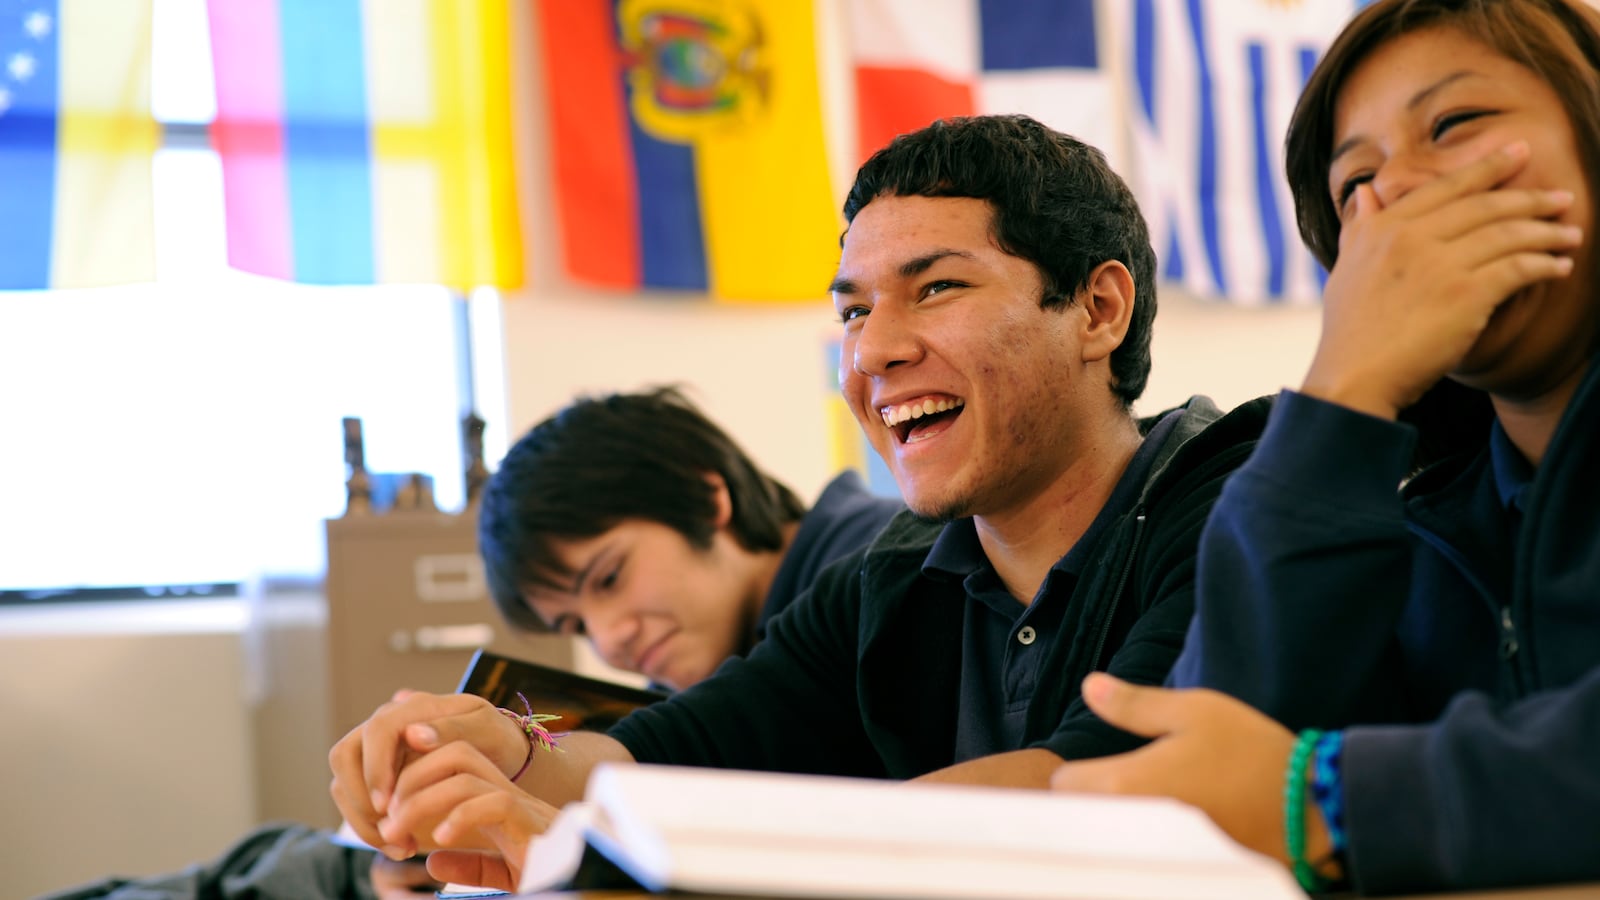 A group of high school students laughing in a classroom